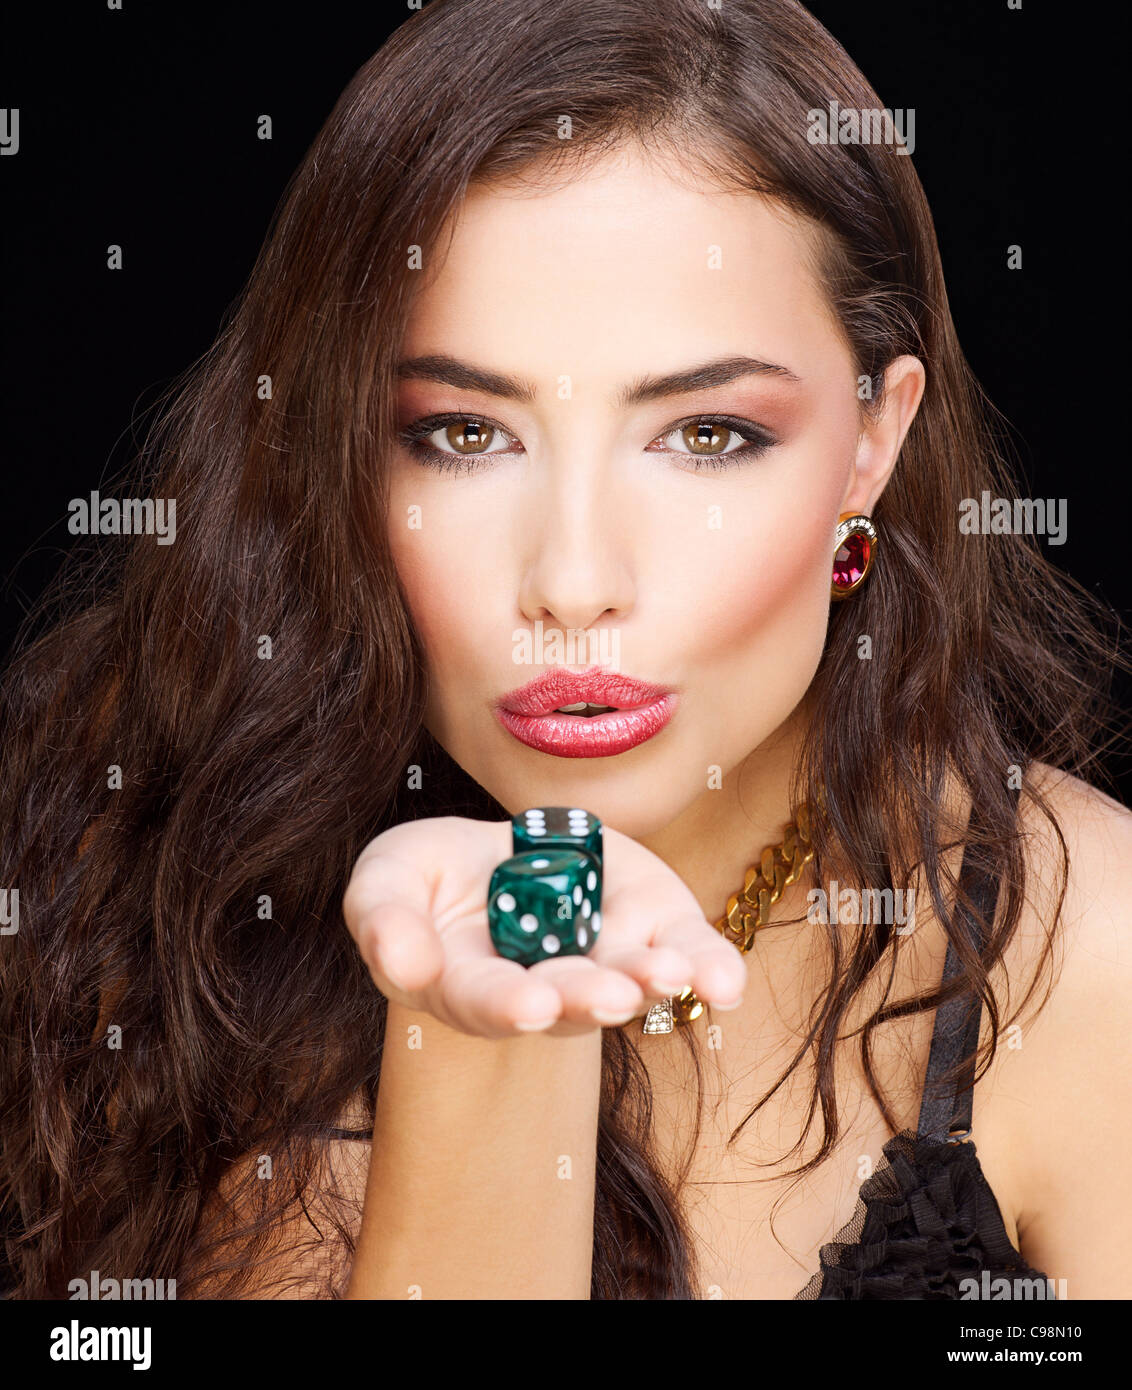 pretty young woman holding dices on black background Stock Photo